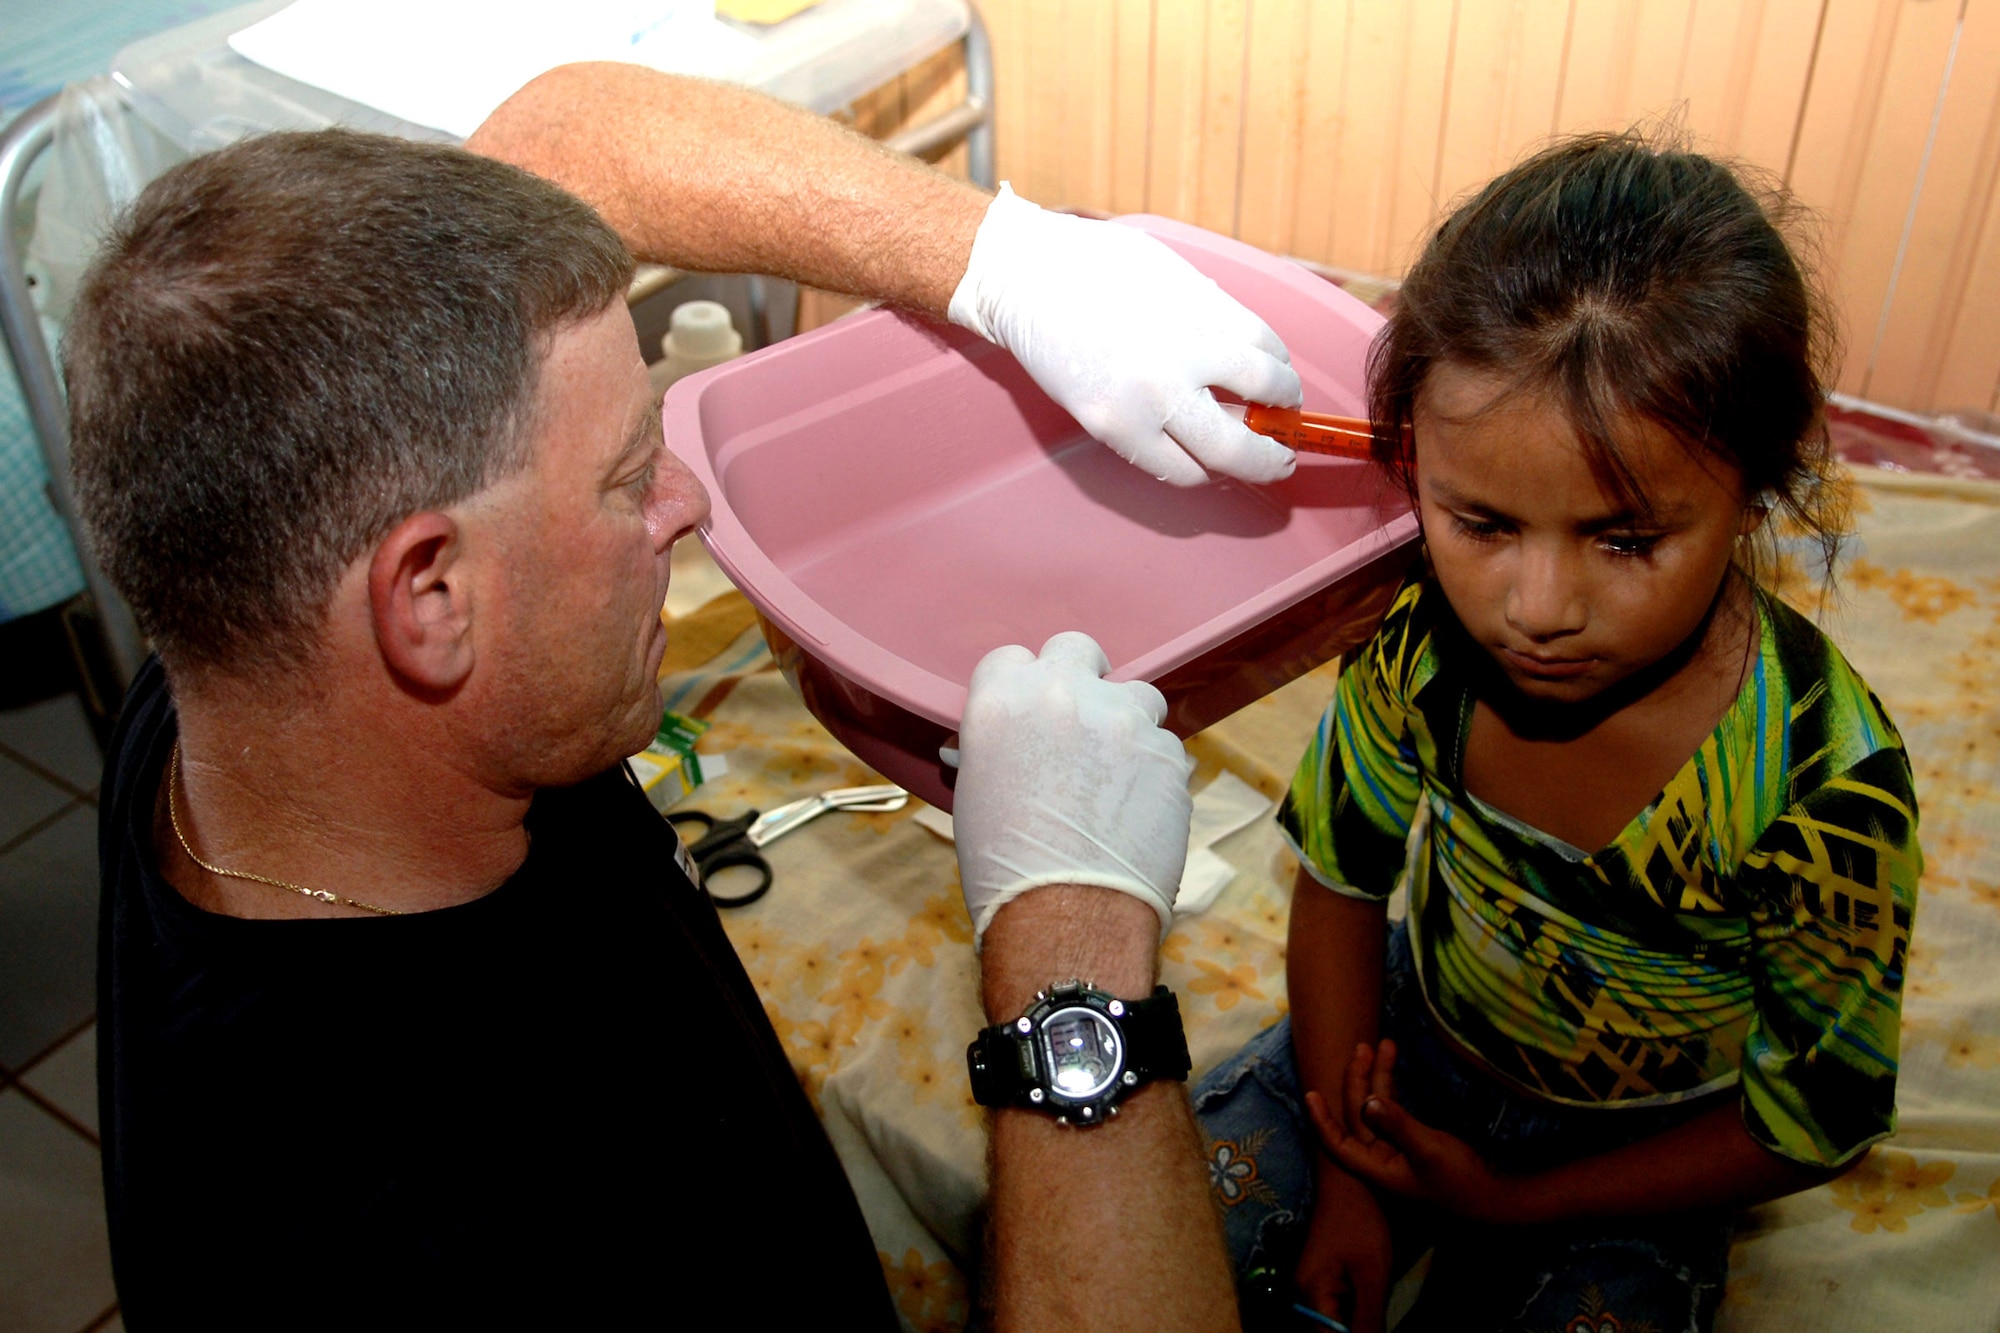 Tech. Sgt. Don Evans treats a 5-year old Bolivian girl during a Medical Readiness Training Exercise in Cobija, Bolivia. Sergeant Evans, assigned to the 152nd Medical Group, Reno Nev., was part of 30-member medical team in Bolivia treating underserved populations in the country. (U.S. Air Force photo)
